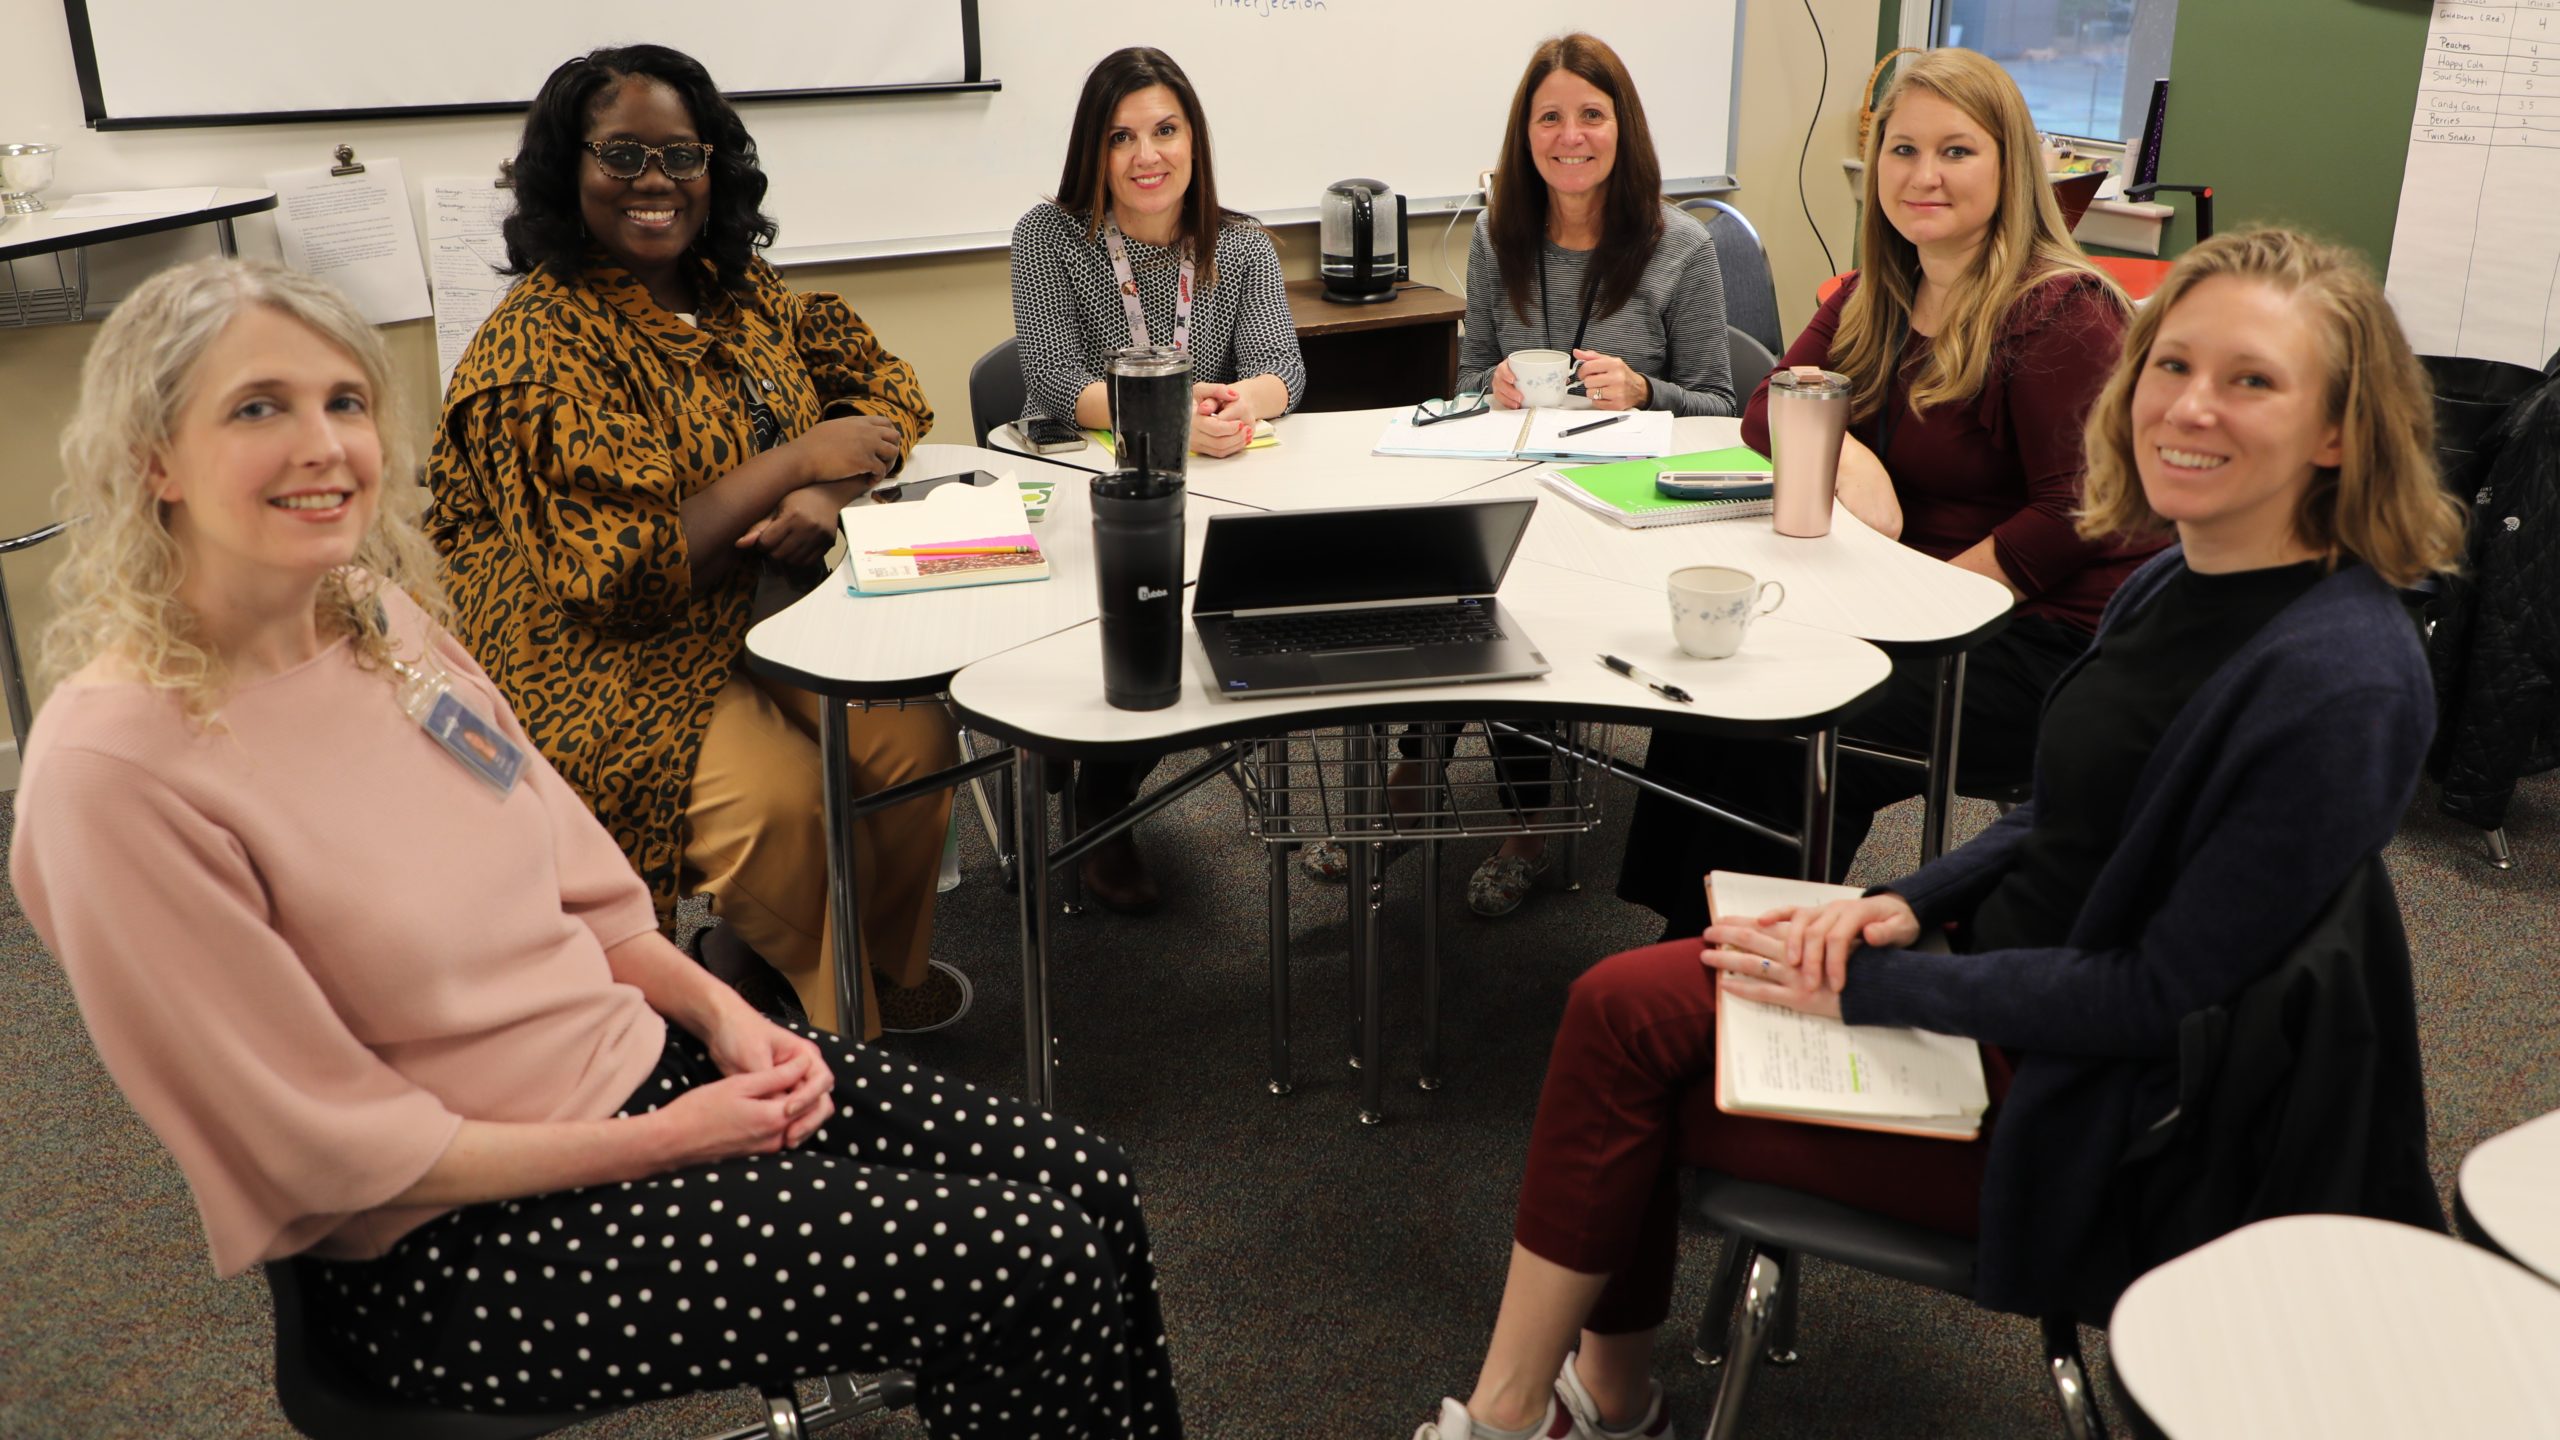 A group of faculty and staff meet to discuss the Read Across Randolph activities. 
(Pictured l to r): Middle School Librarian Kelly Kessler, 7th Grade Language Arts Teacher Delicia Potter, Lower School Librarian Cathy Zeller, Middle School English Department Chair Shelly Harriman, 6th Grade Language Arts Teacher Nikki Cornelison and 5th Grade Language Arts Teacher Elise Hinken.